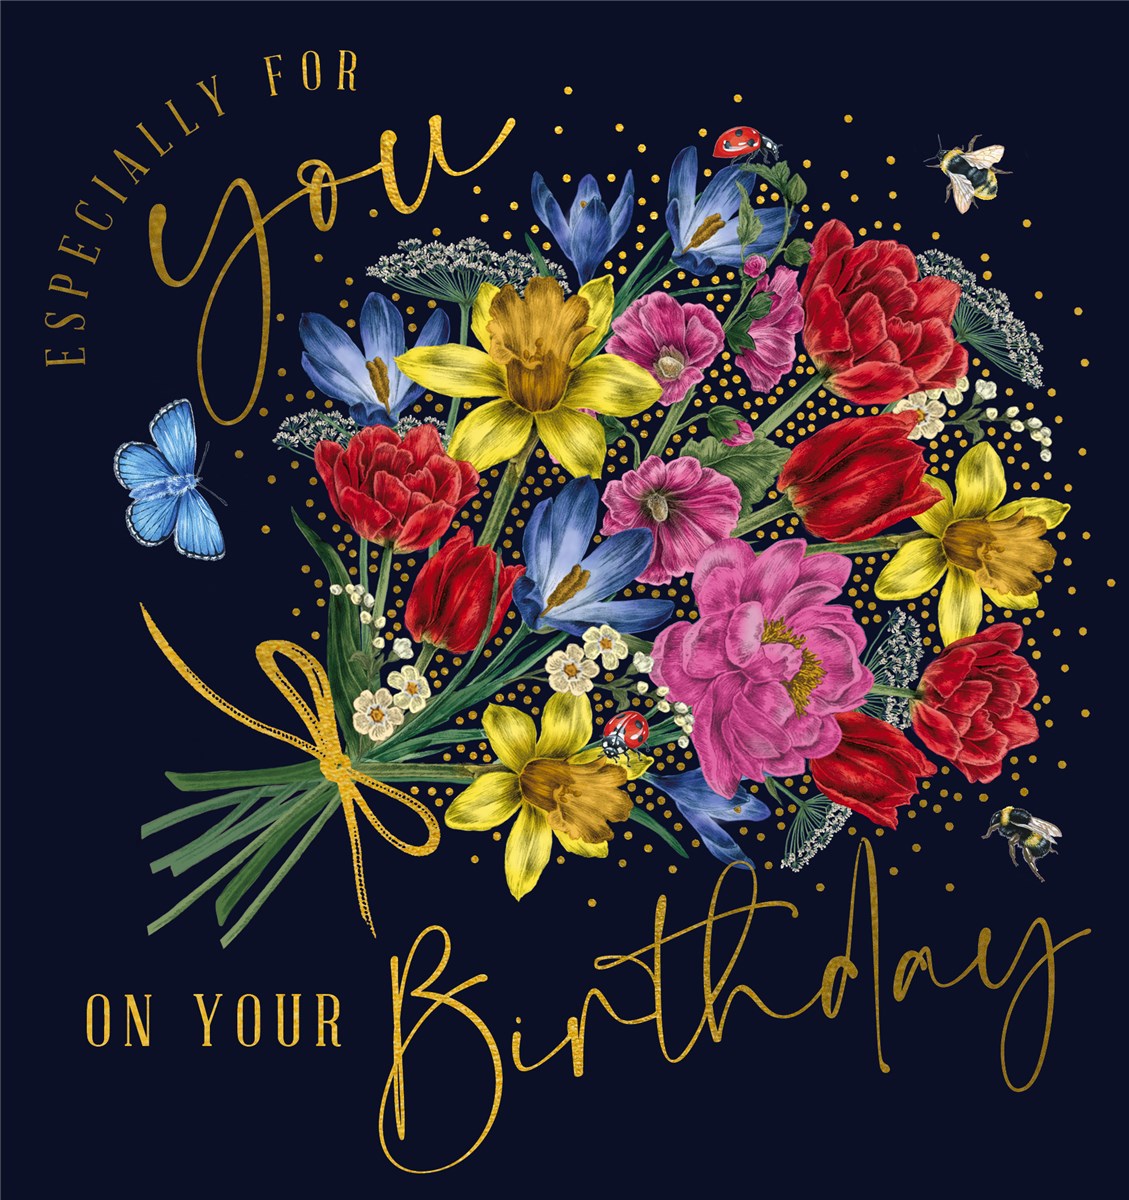 The Art File - Especially for You on your Birthday Navy Floral Card